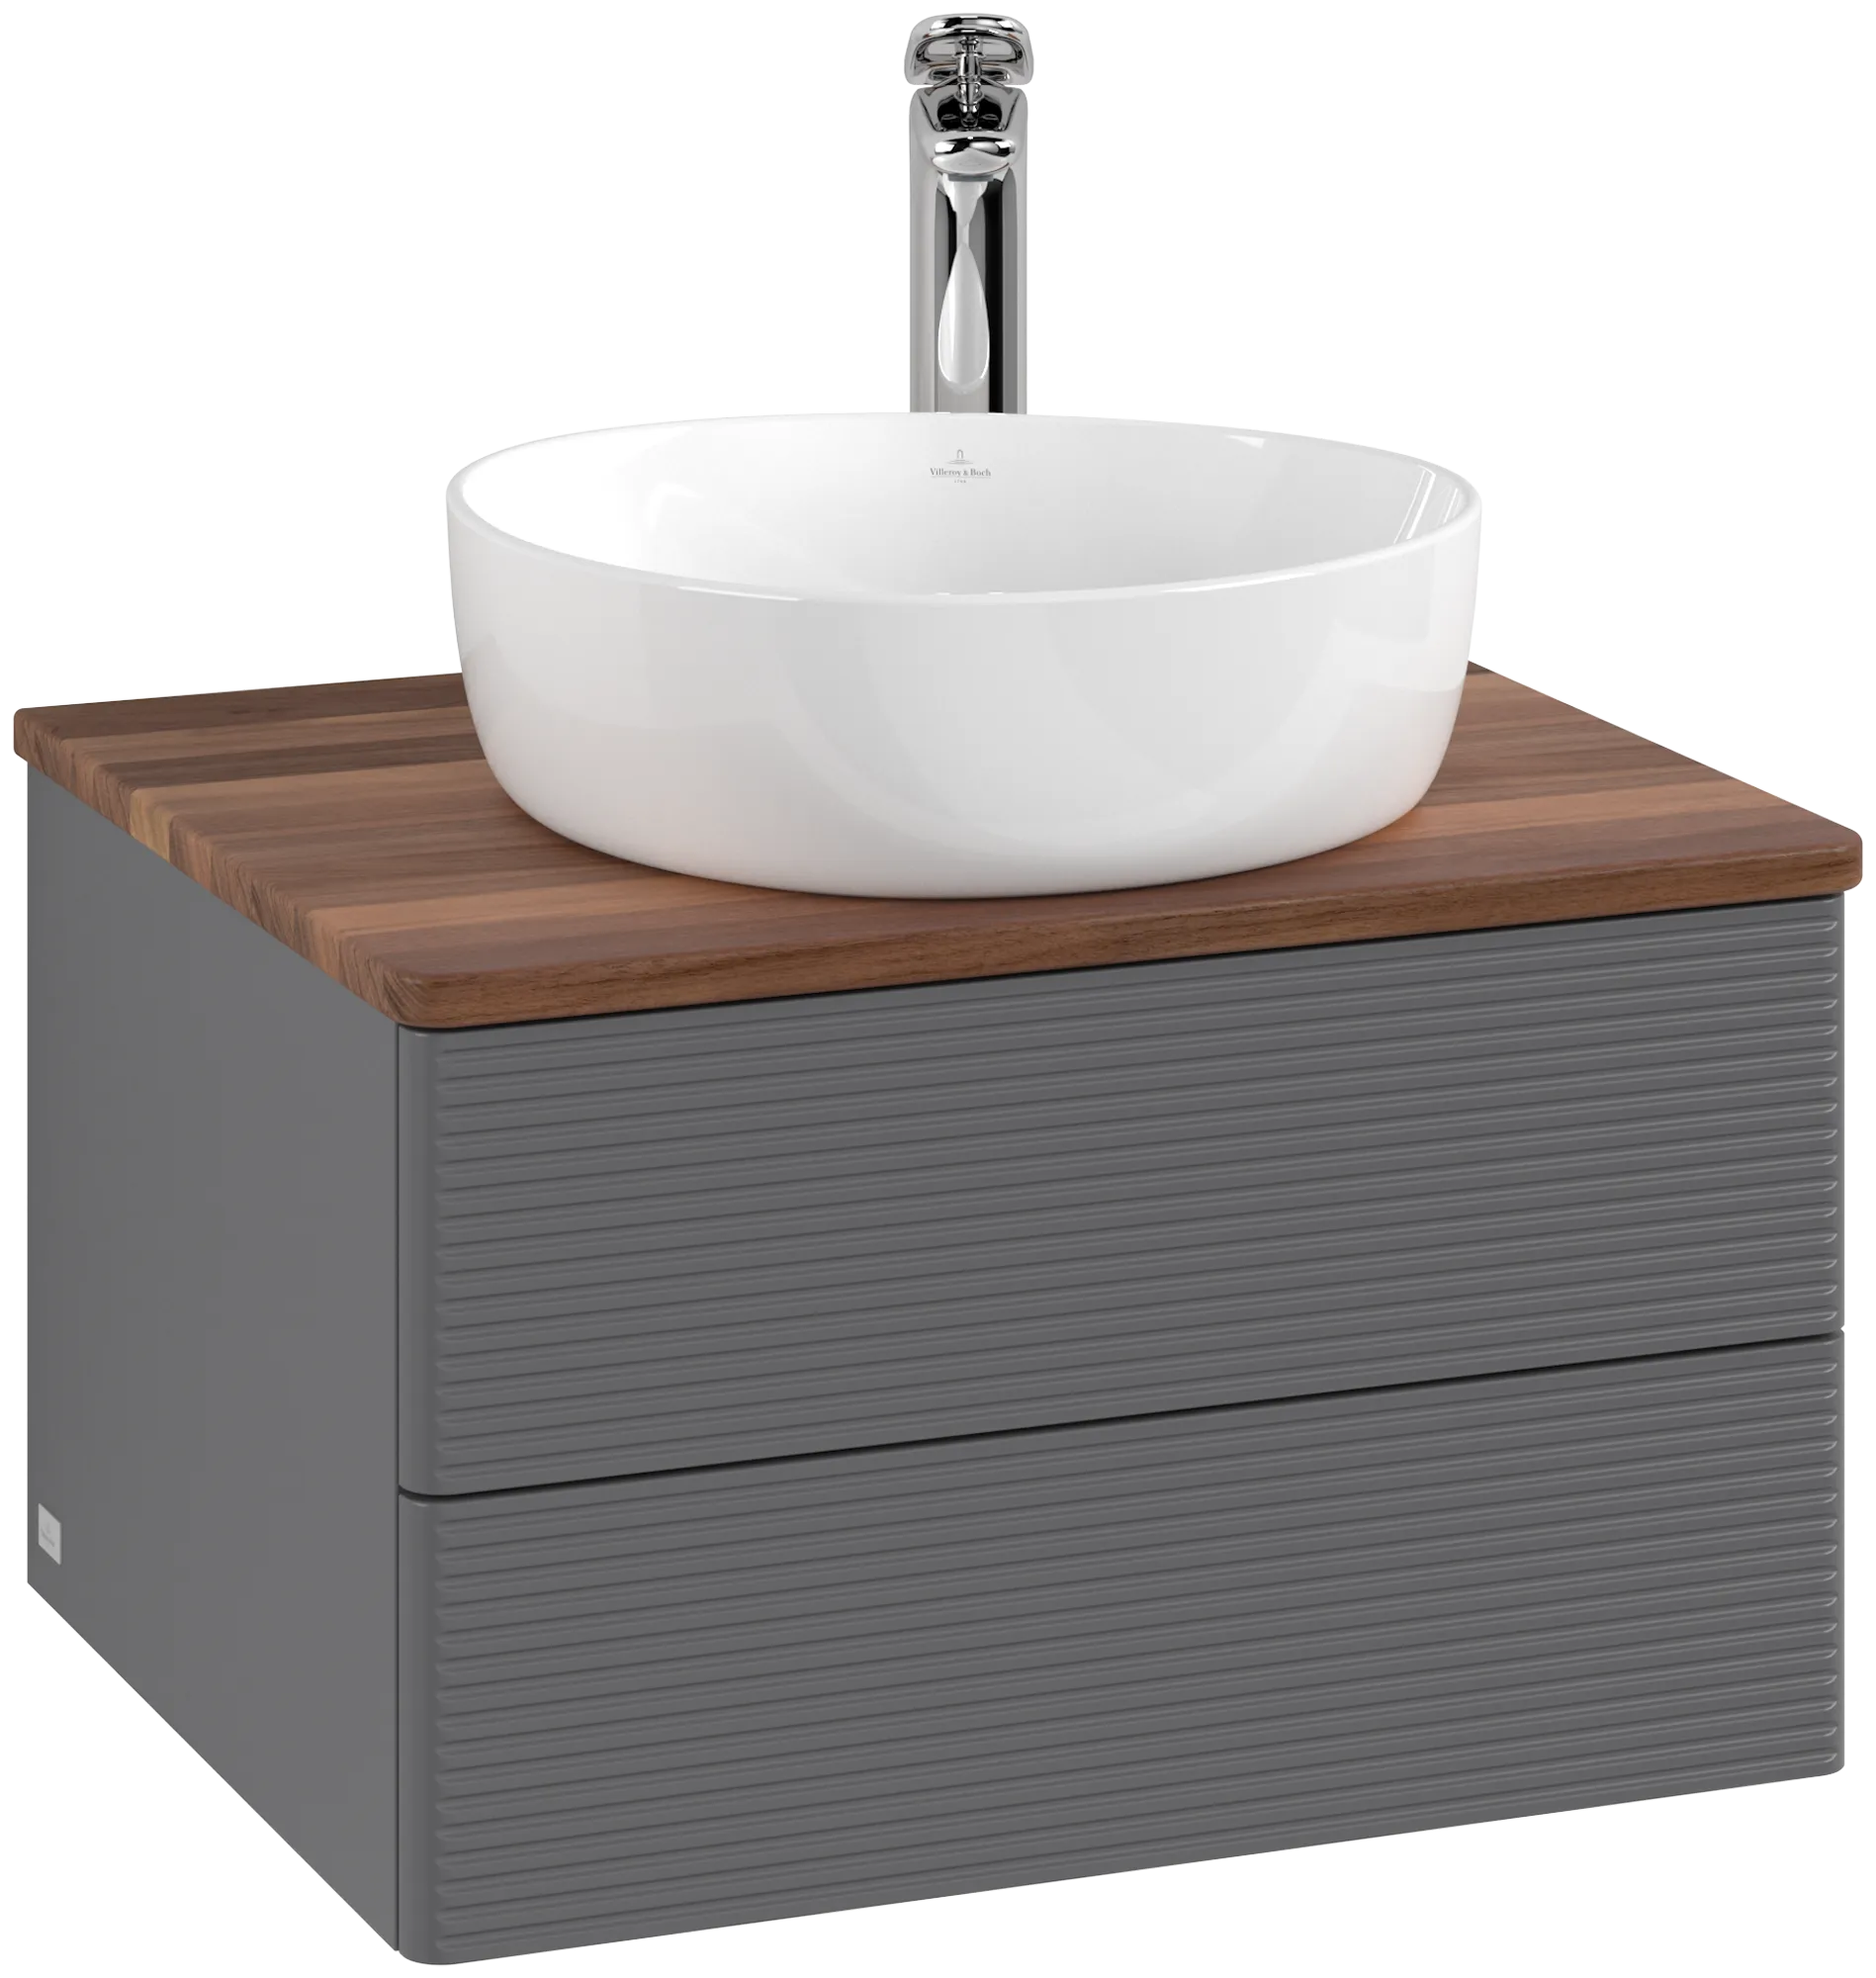 VILLEROY BOCH Antao Vanity unit, with lighting, 2 pull-out compartments, 600 x 360 x 500 mm, Front with grain texture, Anthracite Matt Lacquer / Warm Walnut #L18152GK resmi